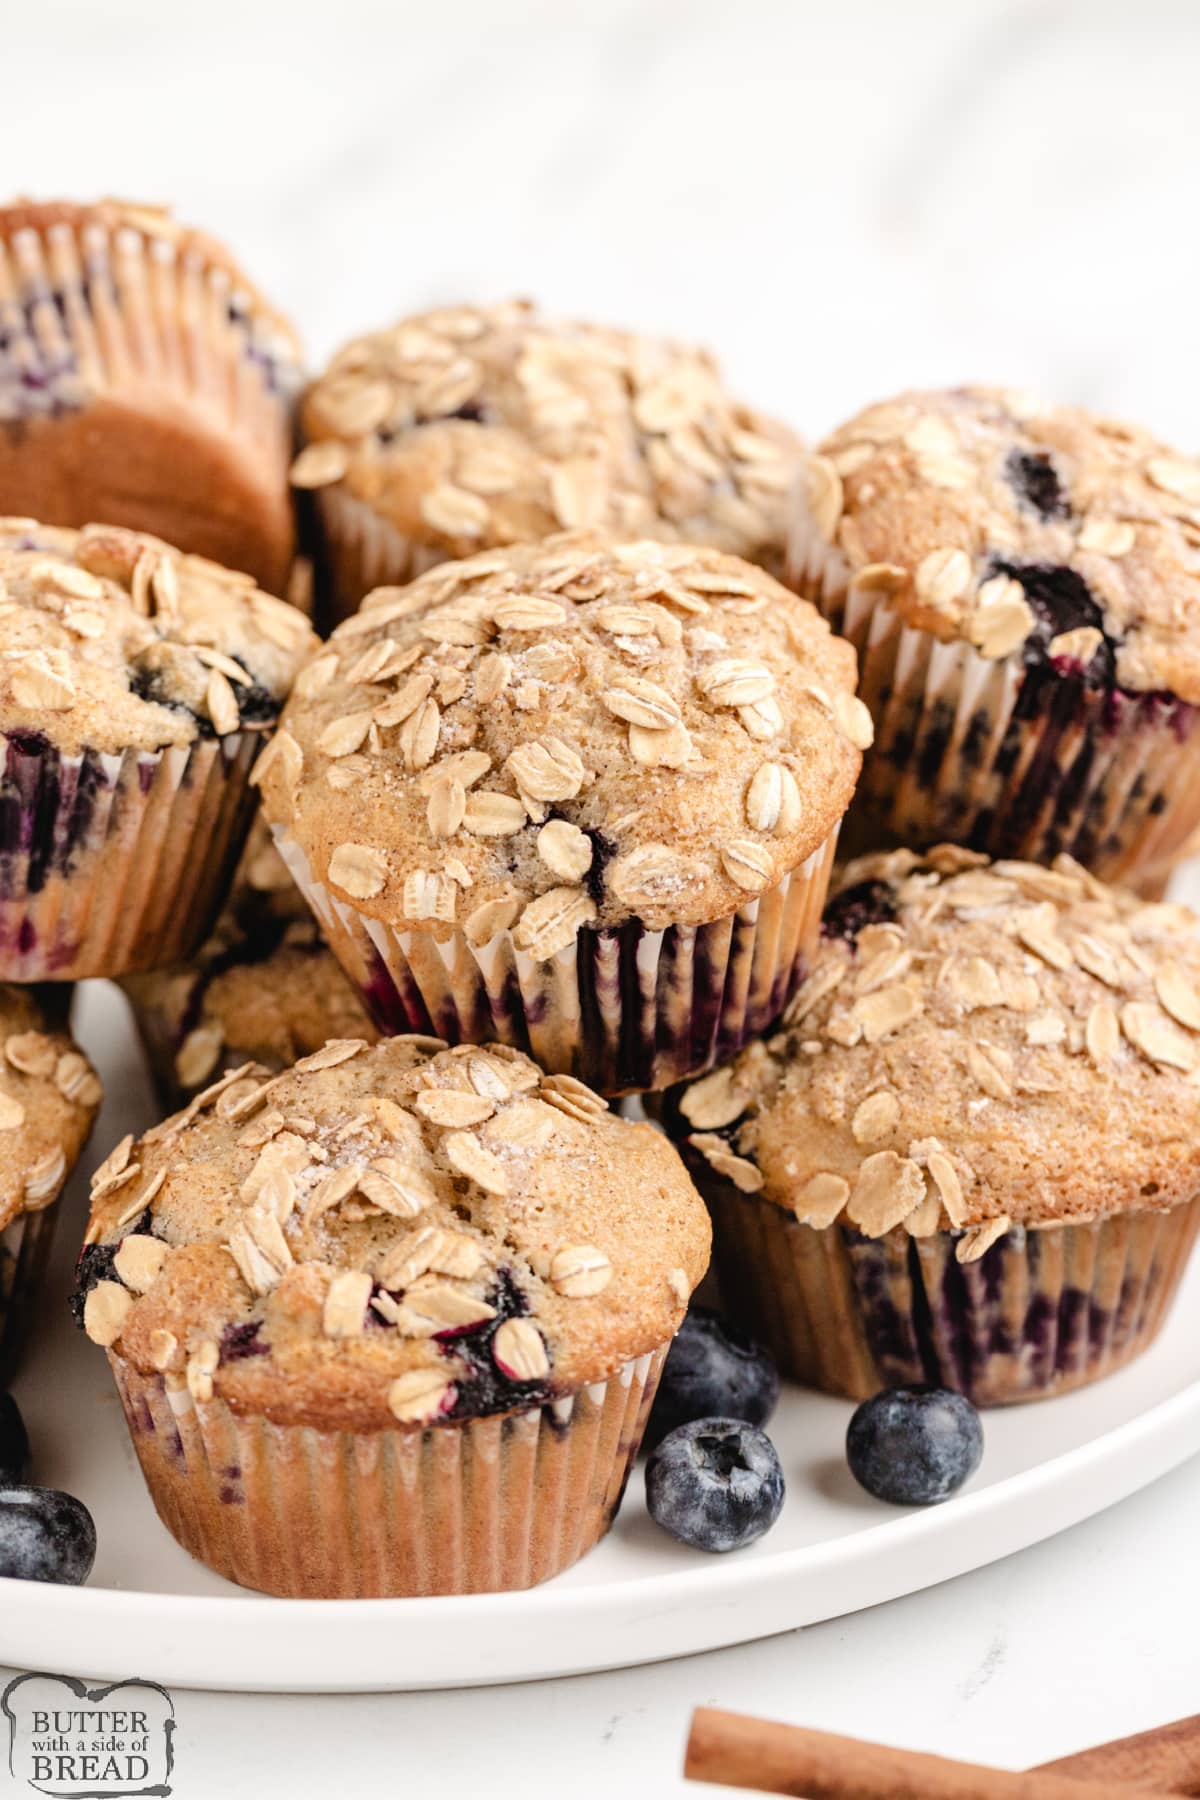 Blueberry Oatmeal Muffins are moist, fluffy and packed with fresh blueberries. This simple blueberry muffin recipe with oats is perfect for breakfast or a snack. 